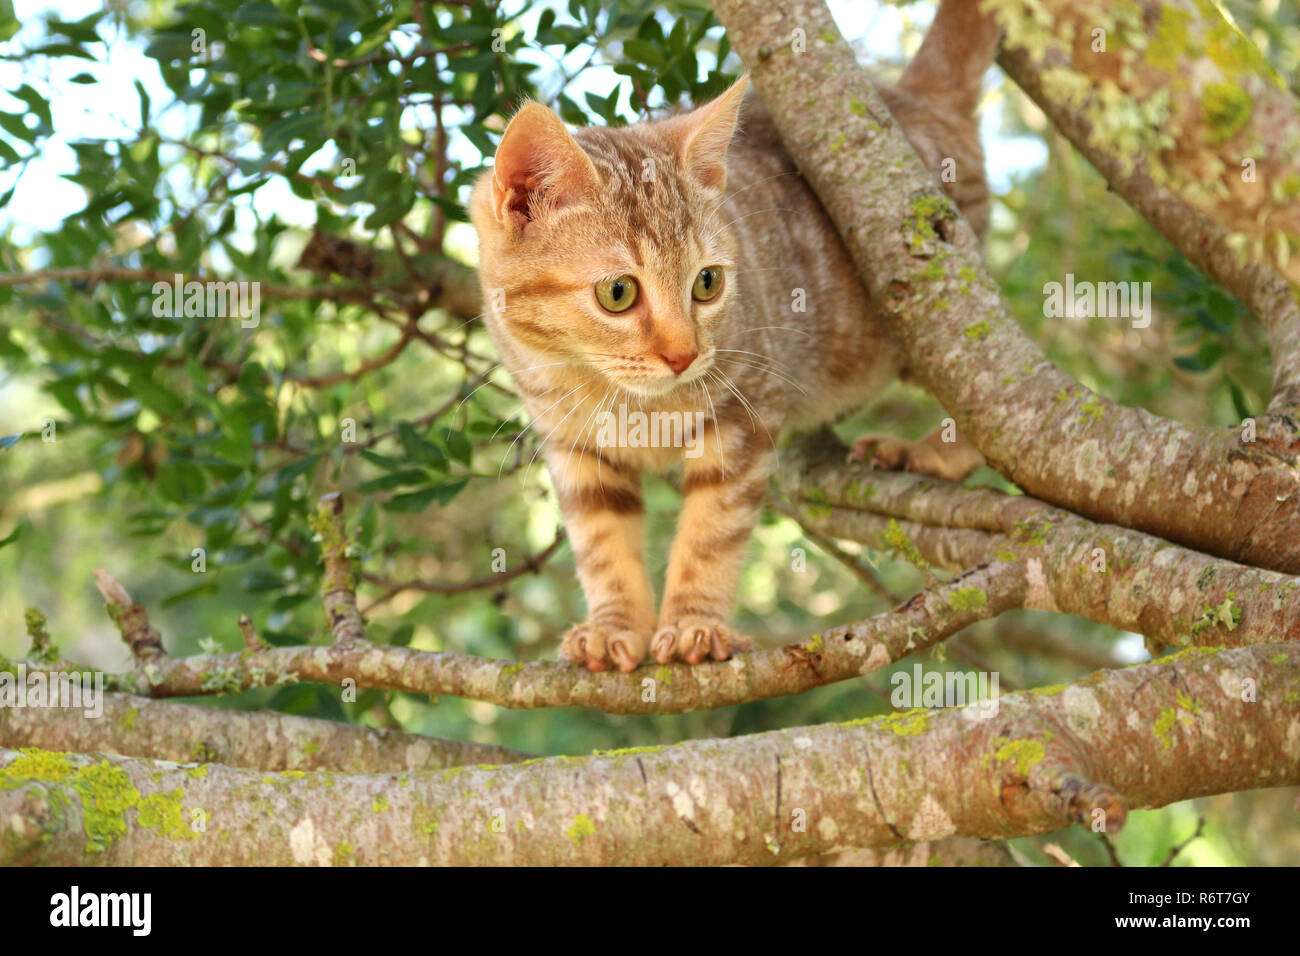 young ginger cat, 3 month old, climbing on a tree Stock Photo